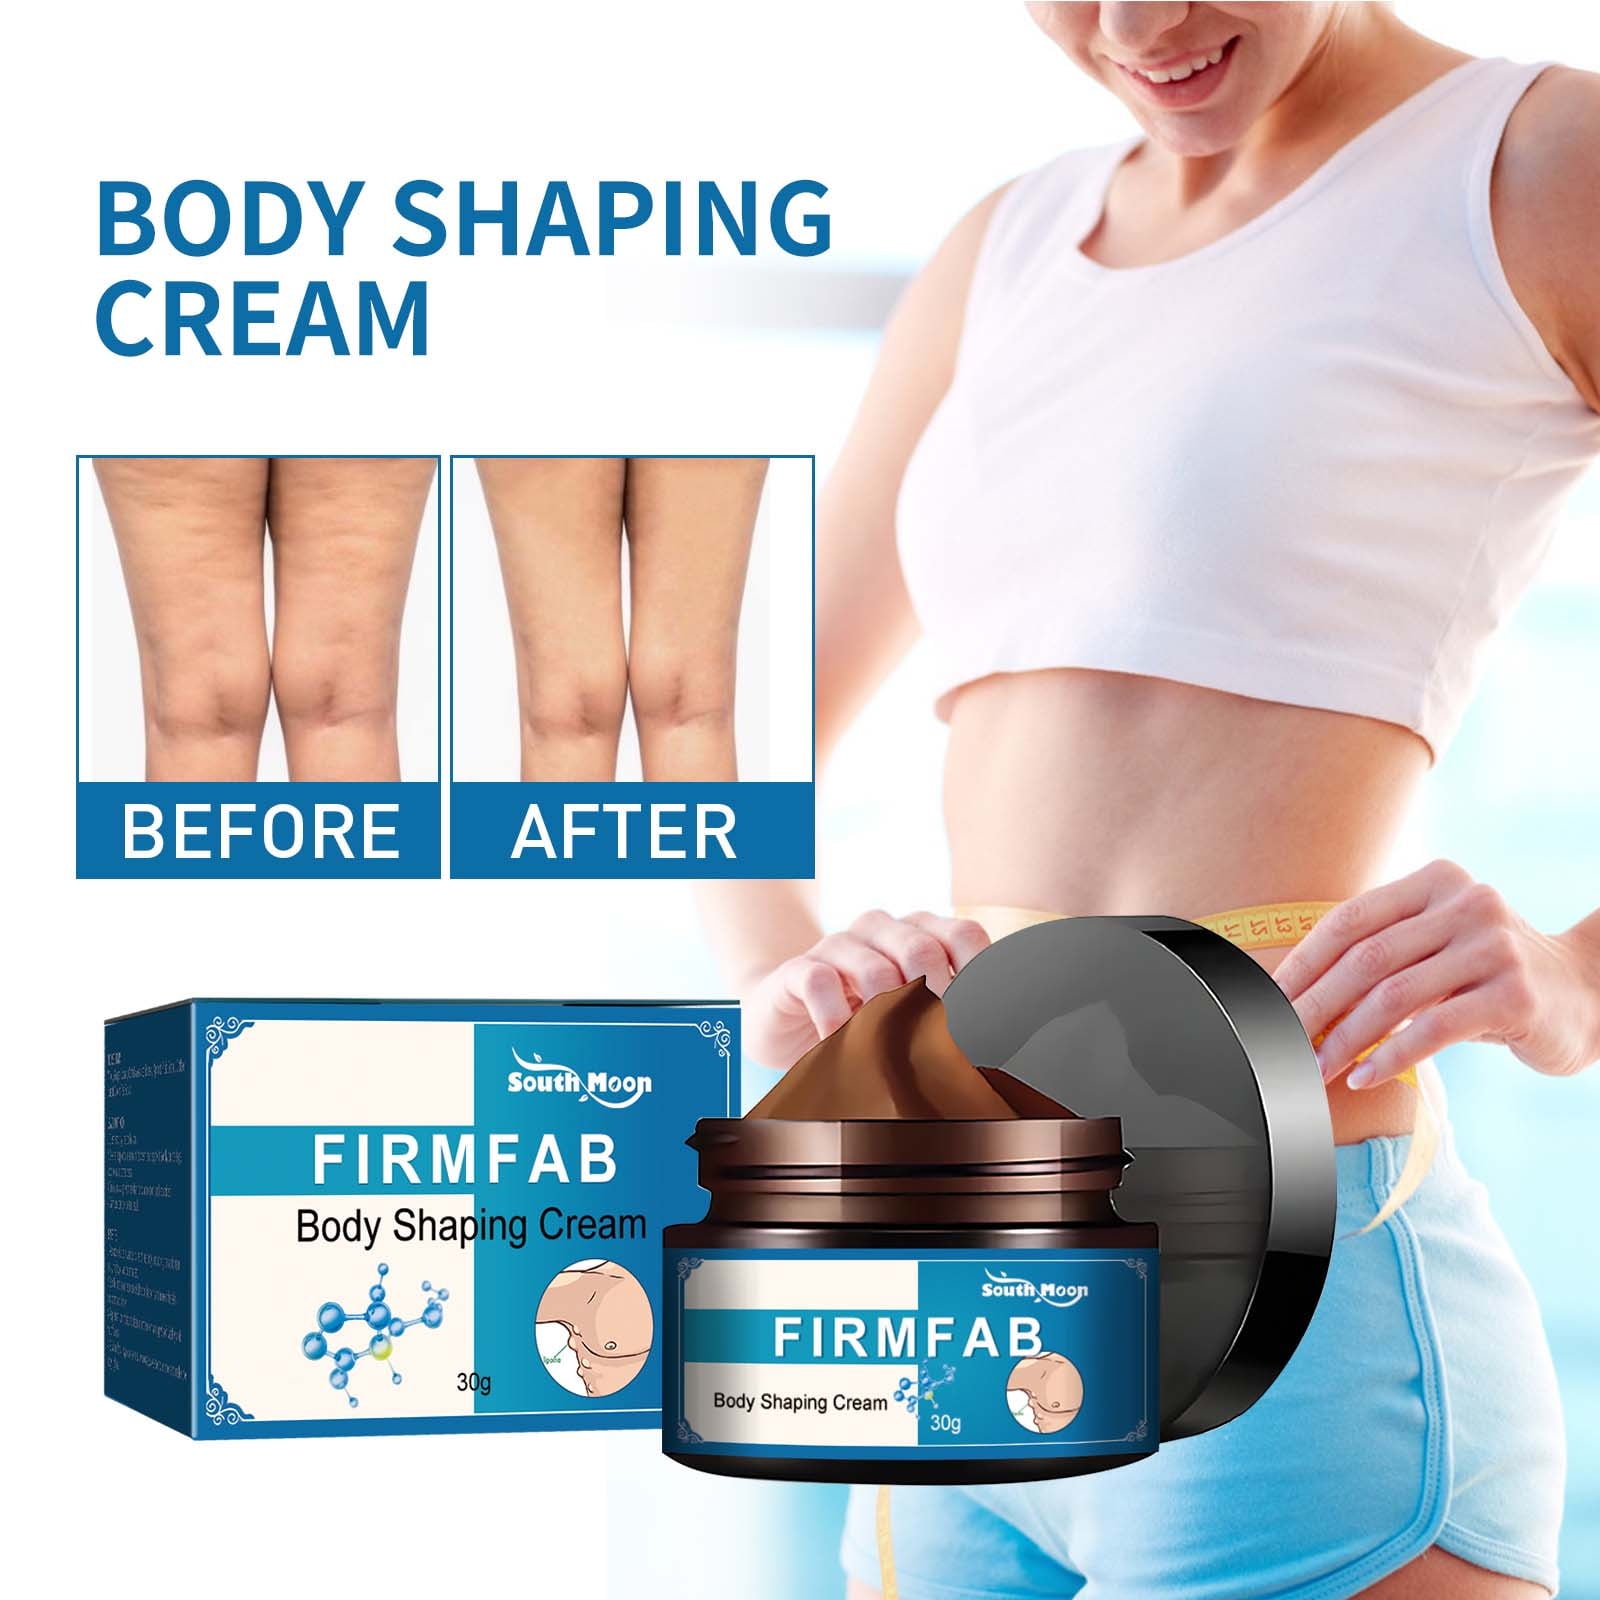 SDJMa Flat Belly Firming Cream - Skin Tightening & Cellulite Cream for  Stomach, Thighs Butt - Moisturizing Firming Lotion with Natural Ingredients  - 30ML 